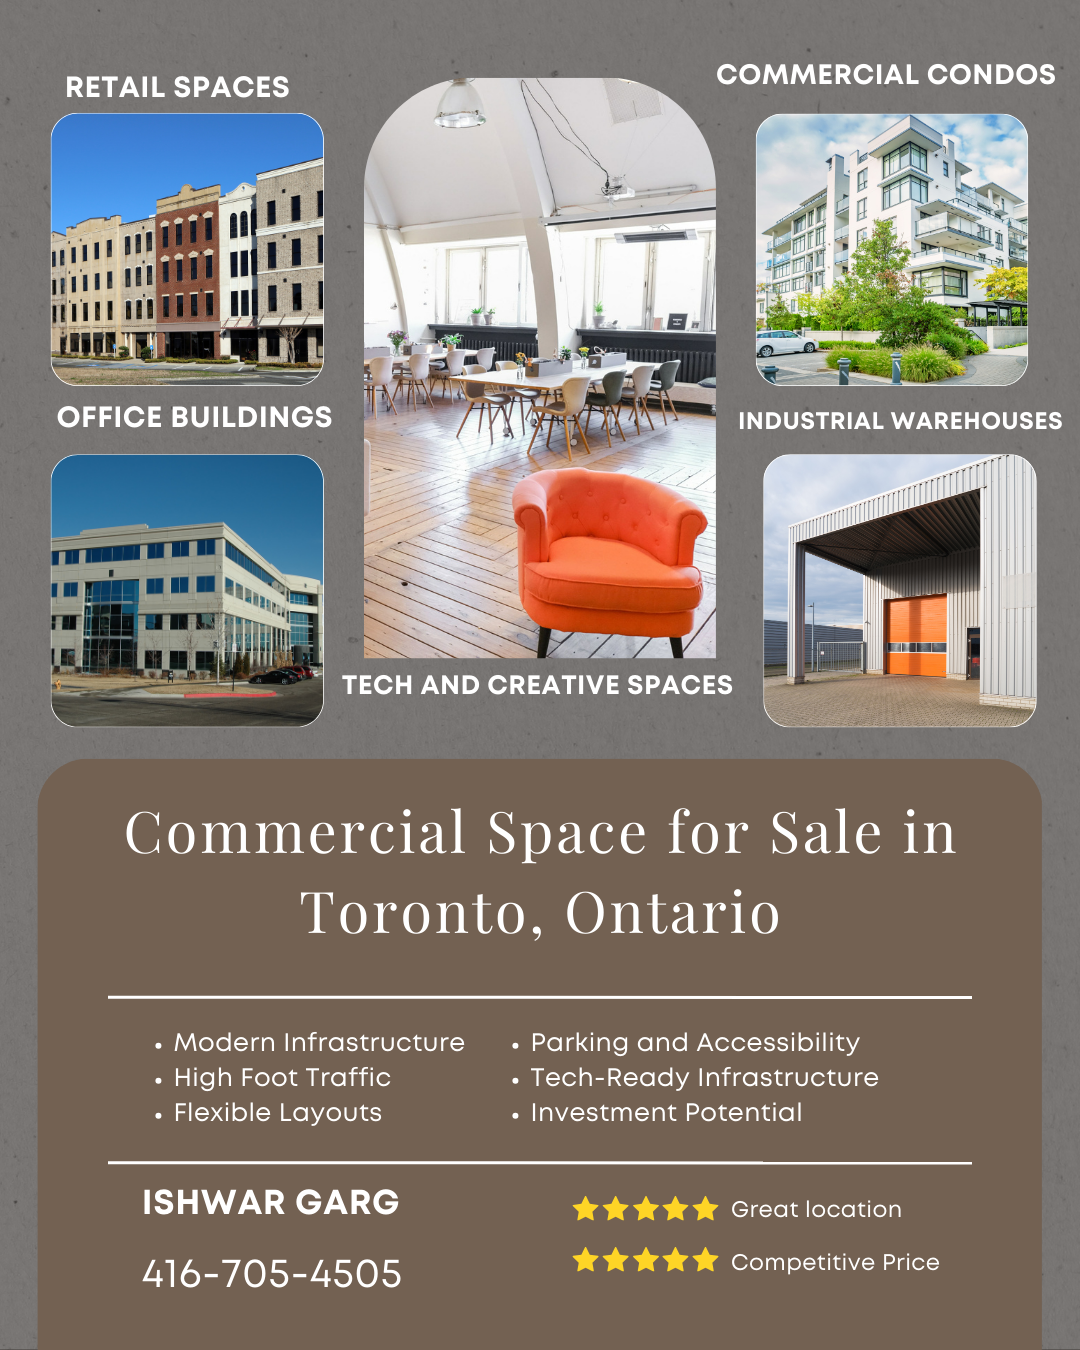 Retail Space, Office Buildings, Tech & Creative Spaces, Commercial Condos, Industrial Ware Houses Commercial Space for Sale in Toronto